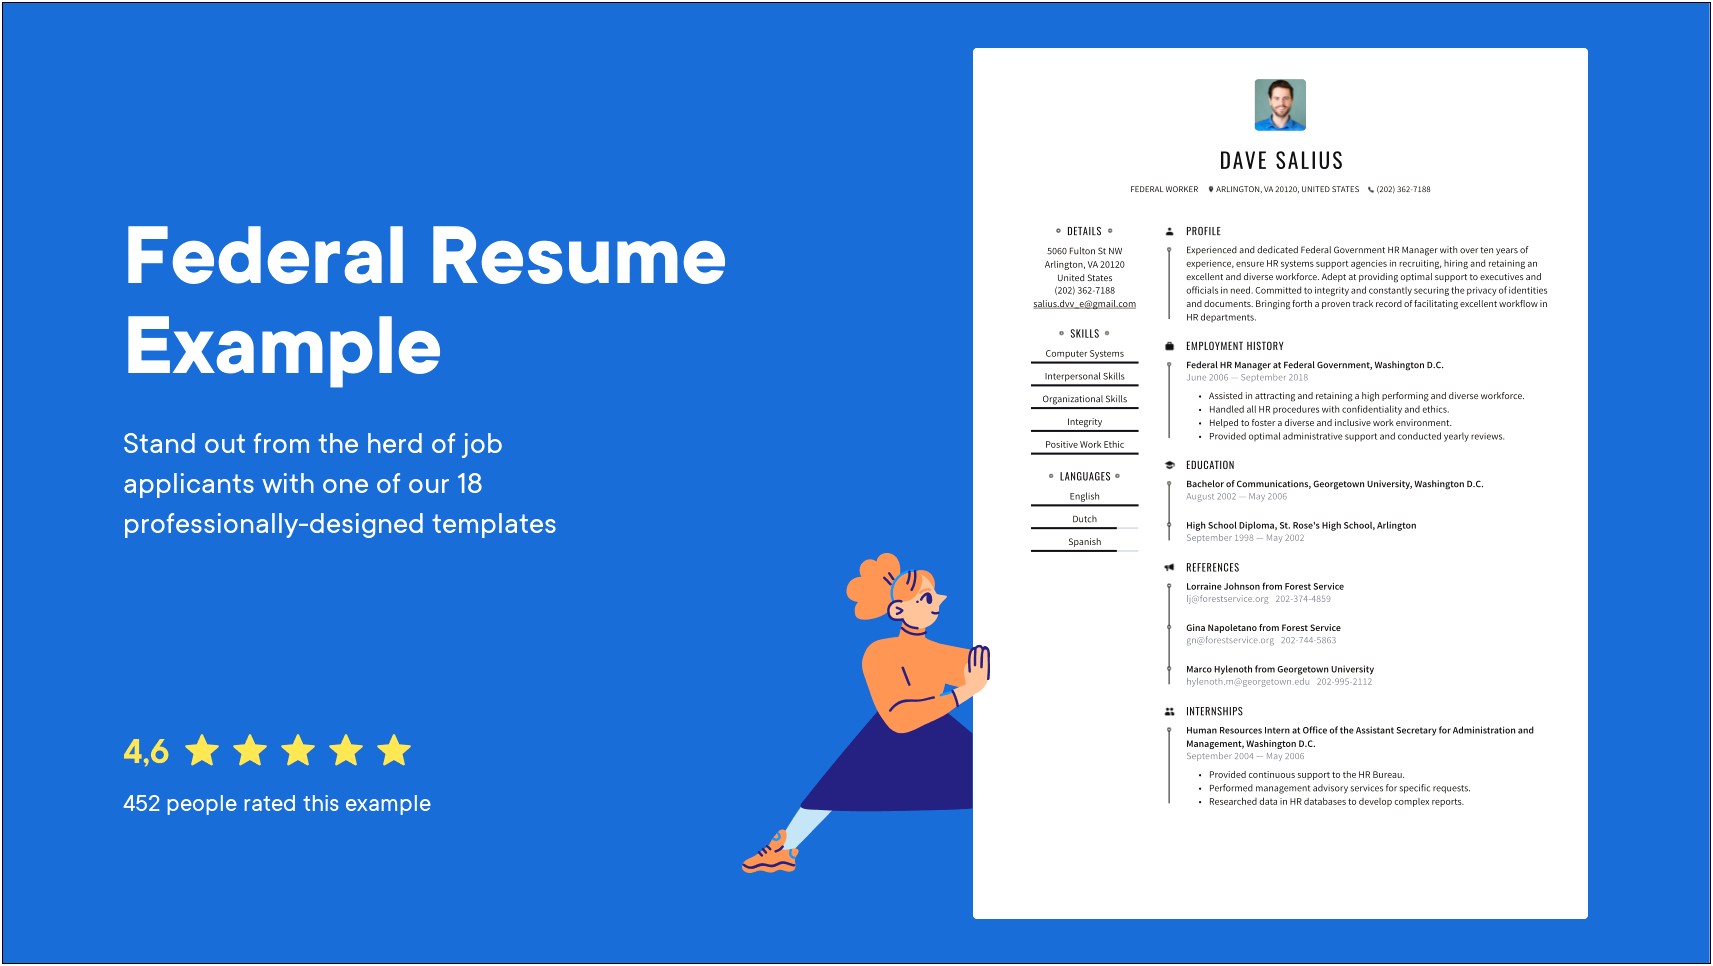 Send Industry And Federal Resume For Federal Job